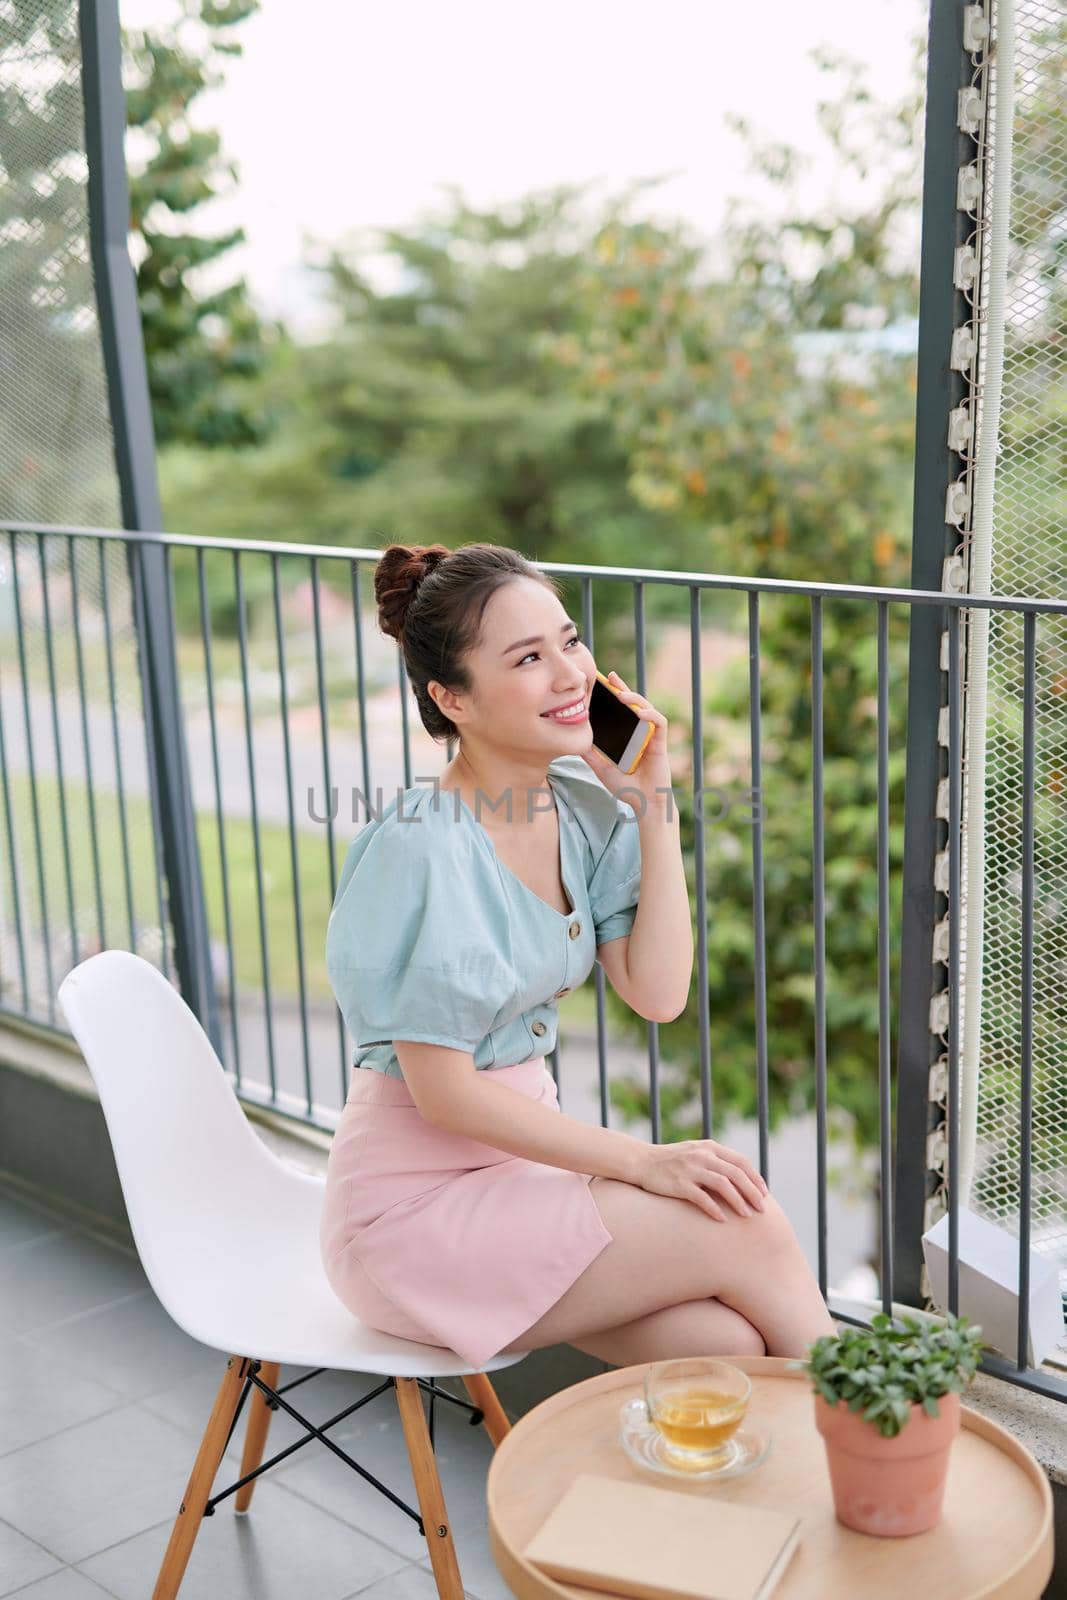 Asian young woman enjoying cup of coffee while using phone on the balcony.